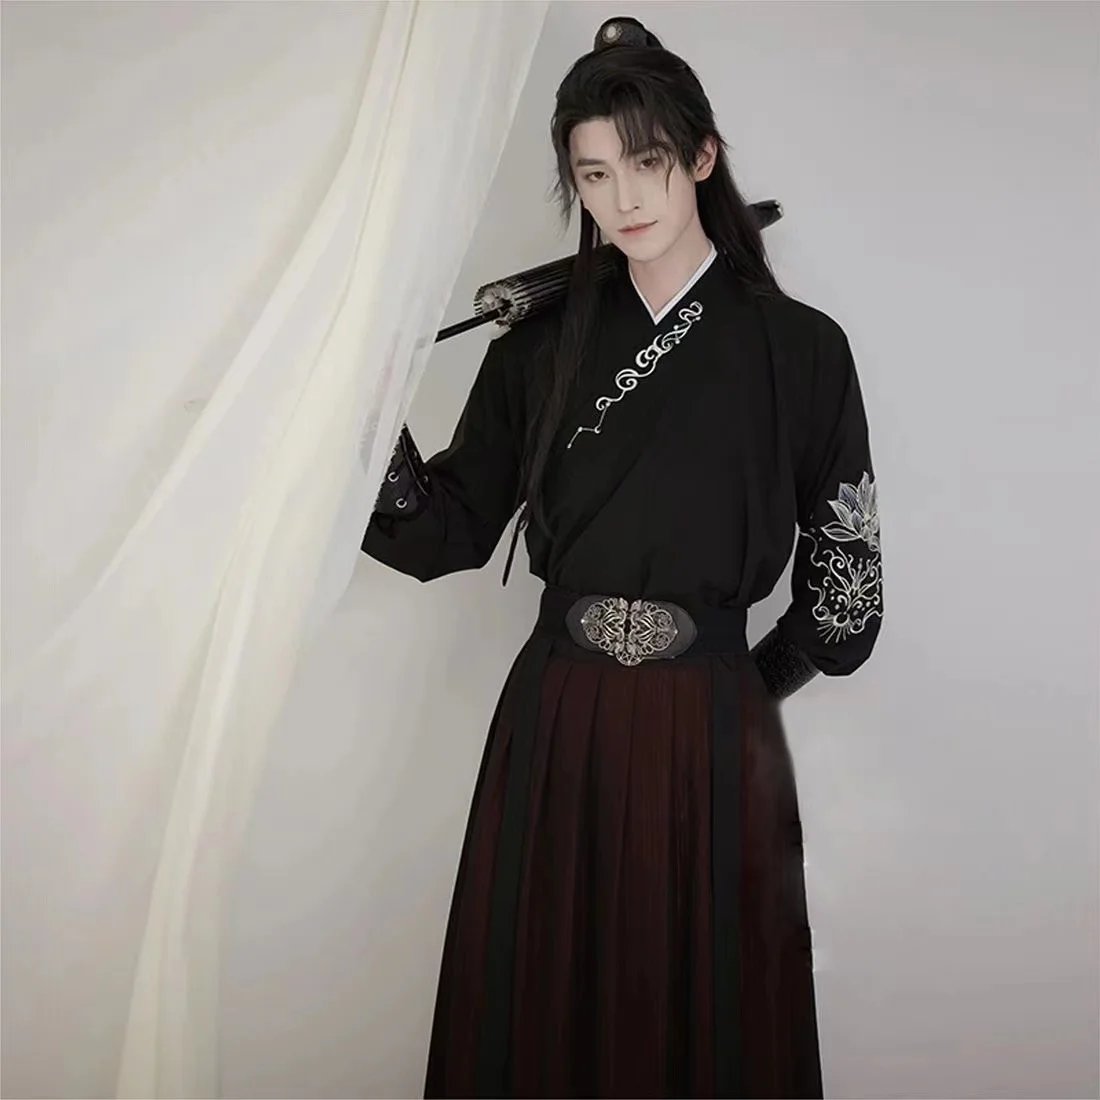 Chinese Style Hanfu Men Ancient Black Costume Hanfu Dress for Boys Girls Young Men Women Photography Cosplay Party Show Clothing dvotinst newborn baby photography prop soft fleece scarf bathrobes slipper 3pcs fotografia costume shooting photo props clothing